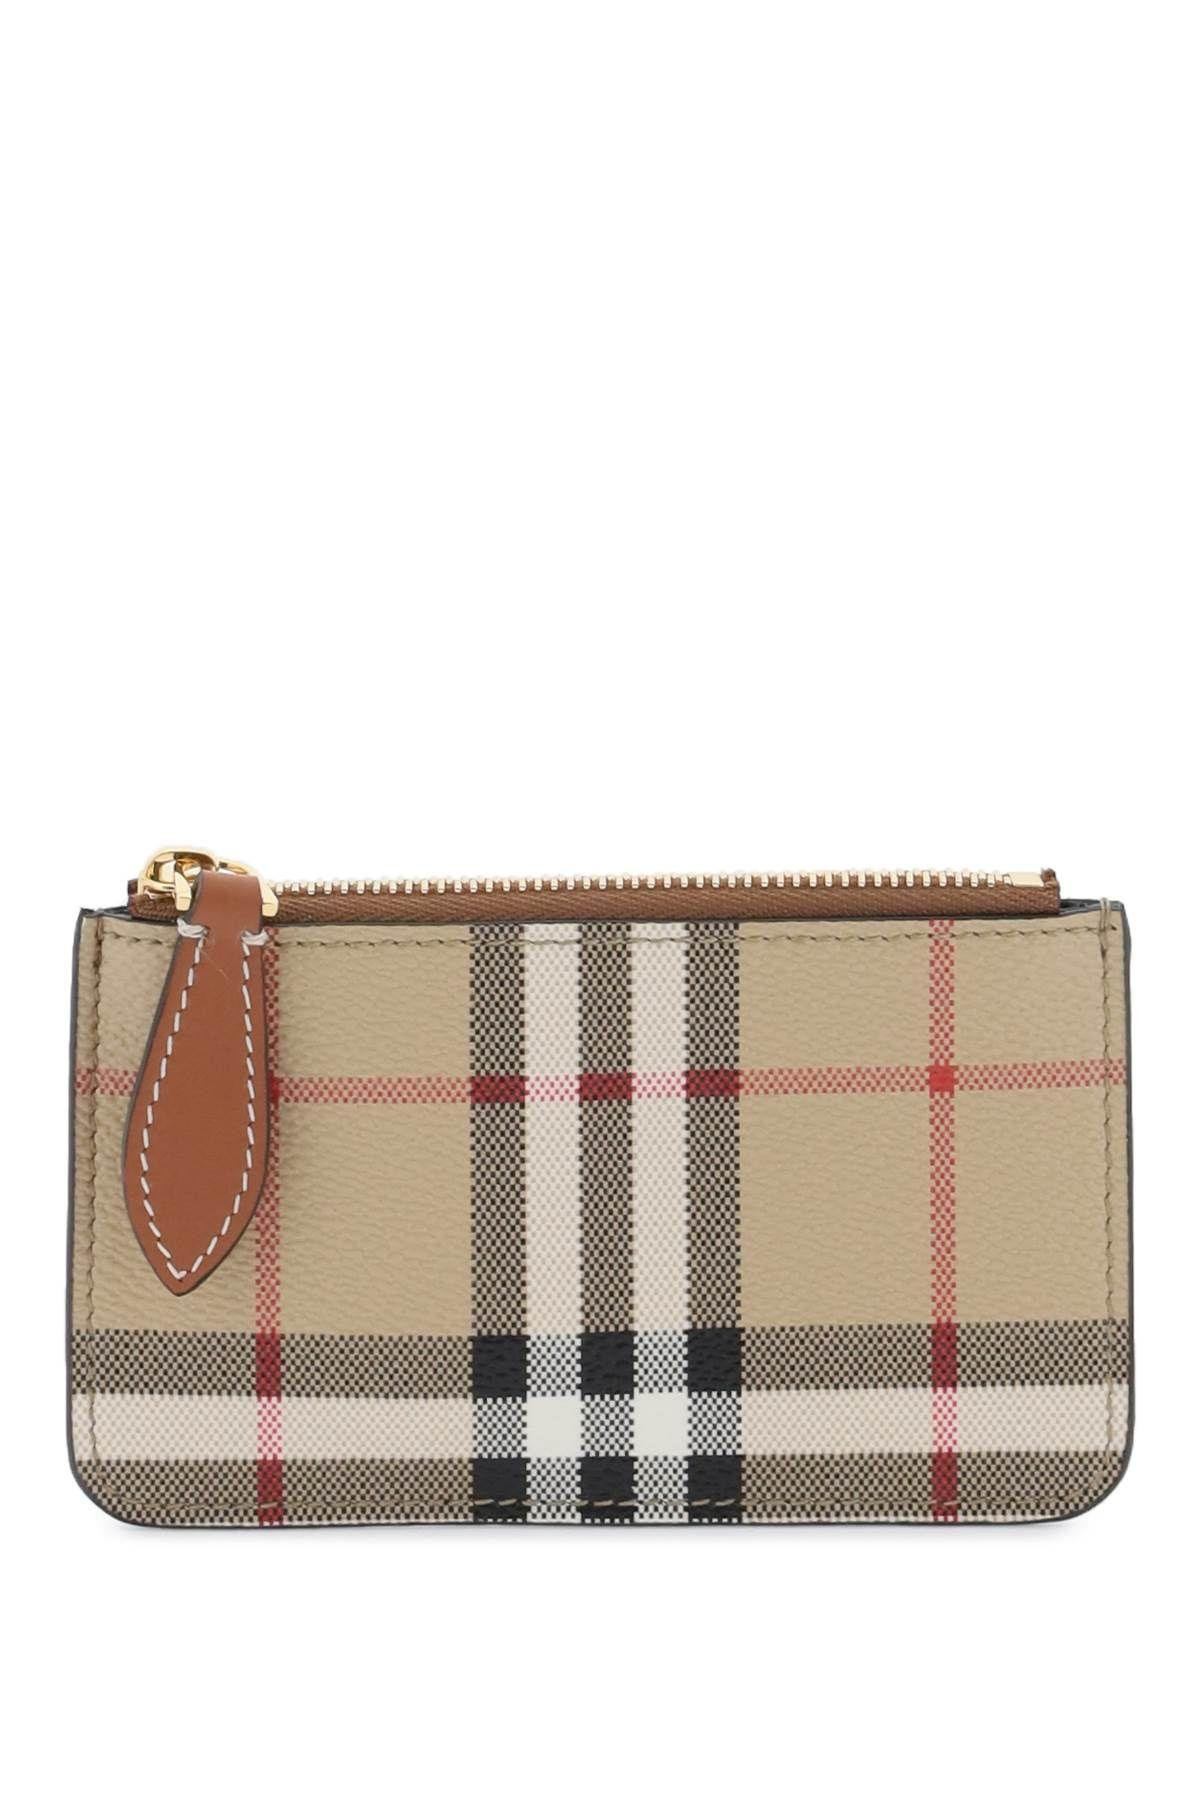 BURBERRY Check coin purse with chain strap Burberry